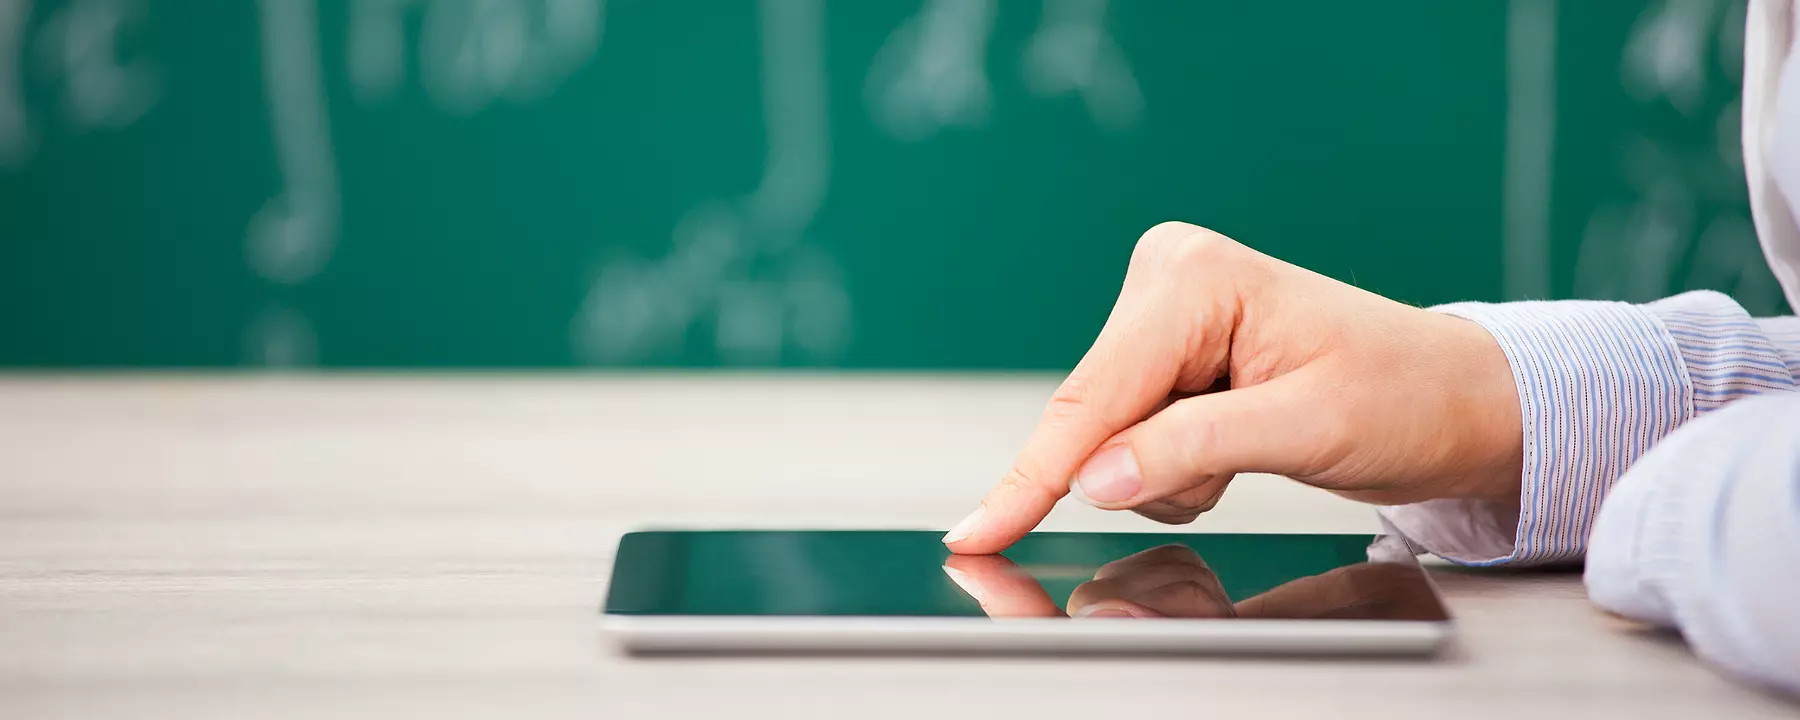 A person uses a tablet in front of a chalkboard in a classroom